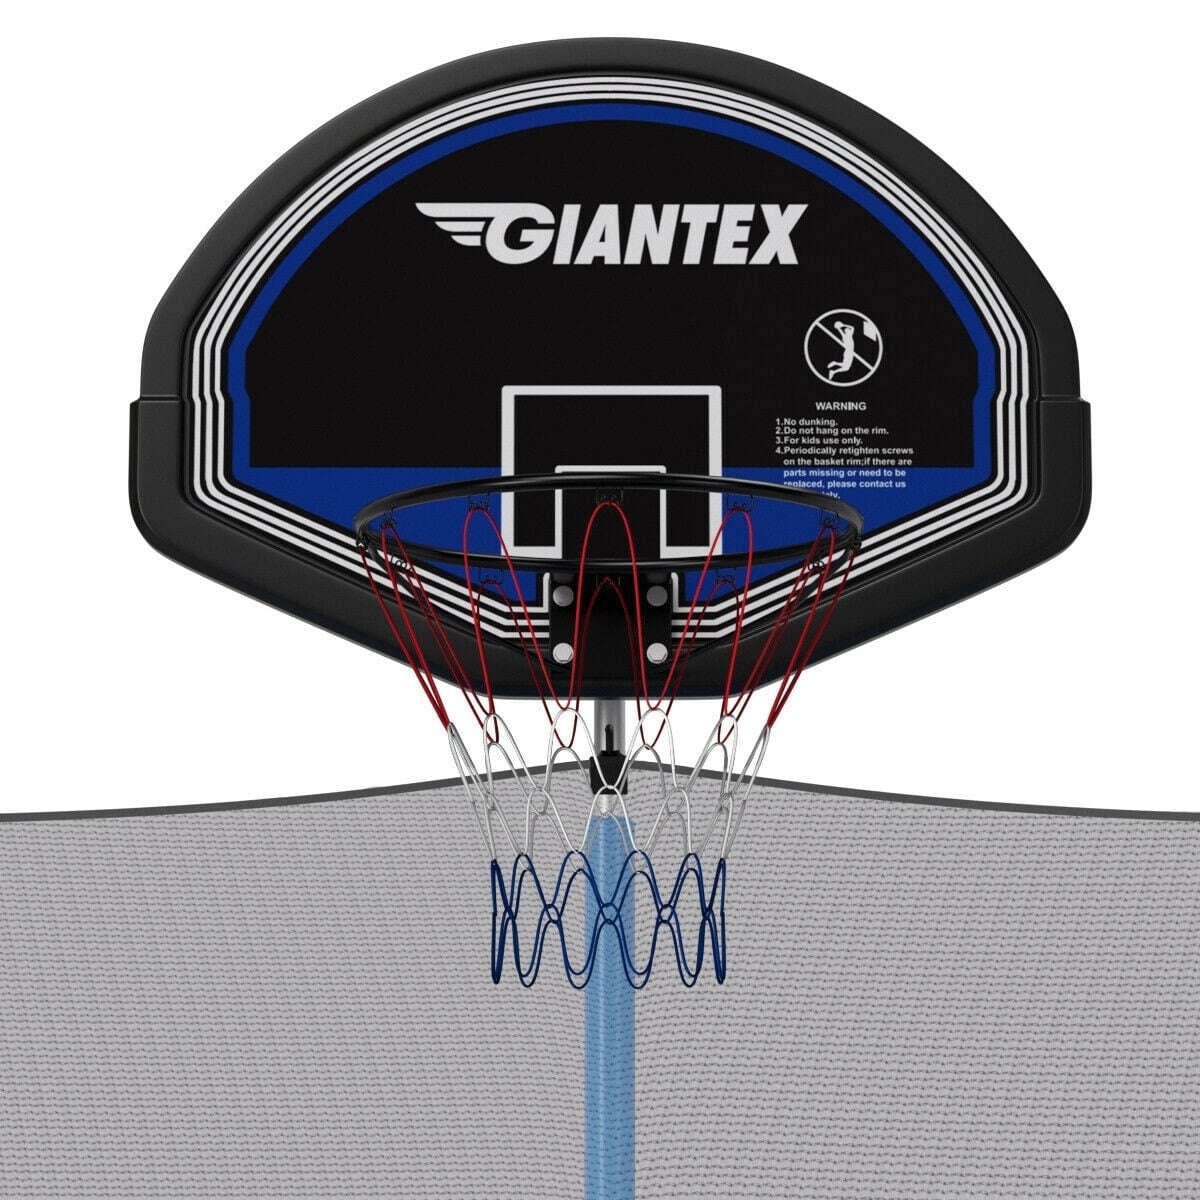 15ft Round Outdoor Enclosed Trampoline with Safety Enclosure Net and Basketball Hoop - Soothe Seating